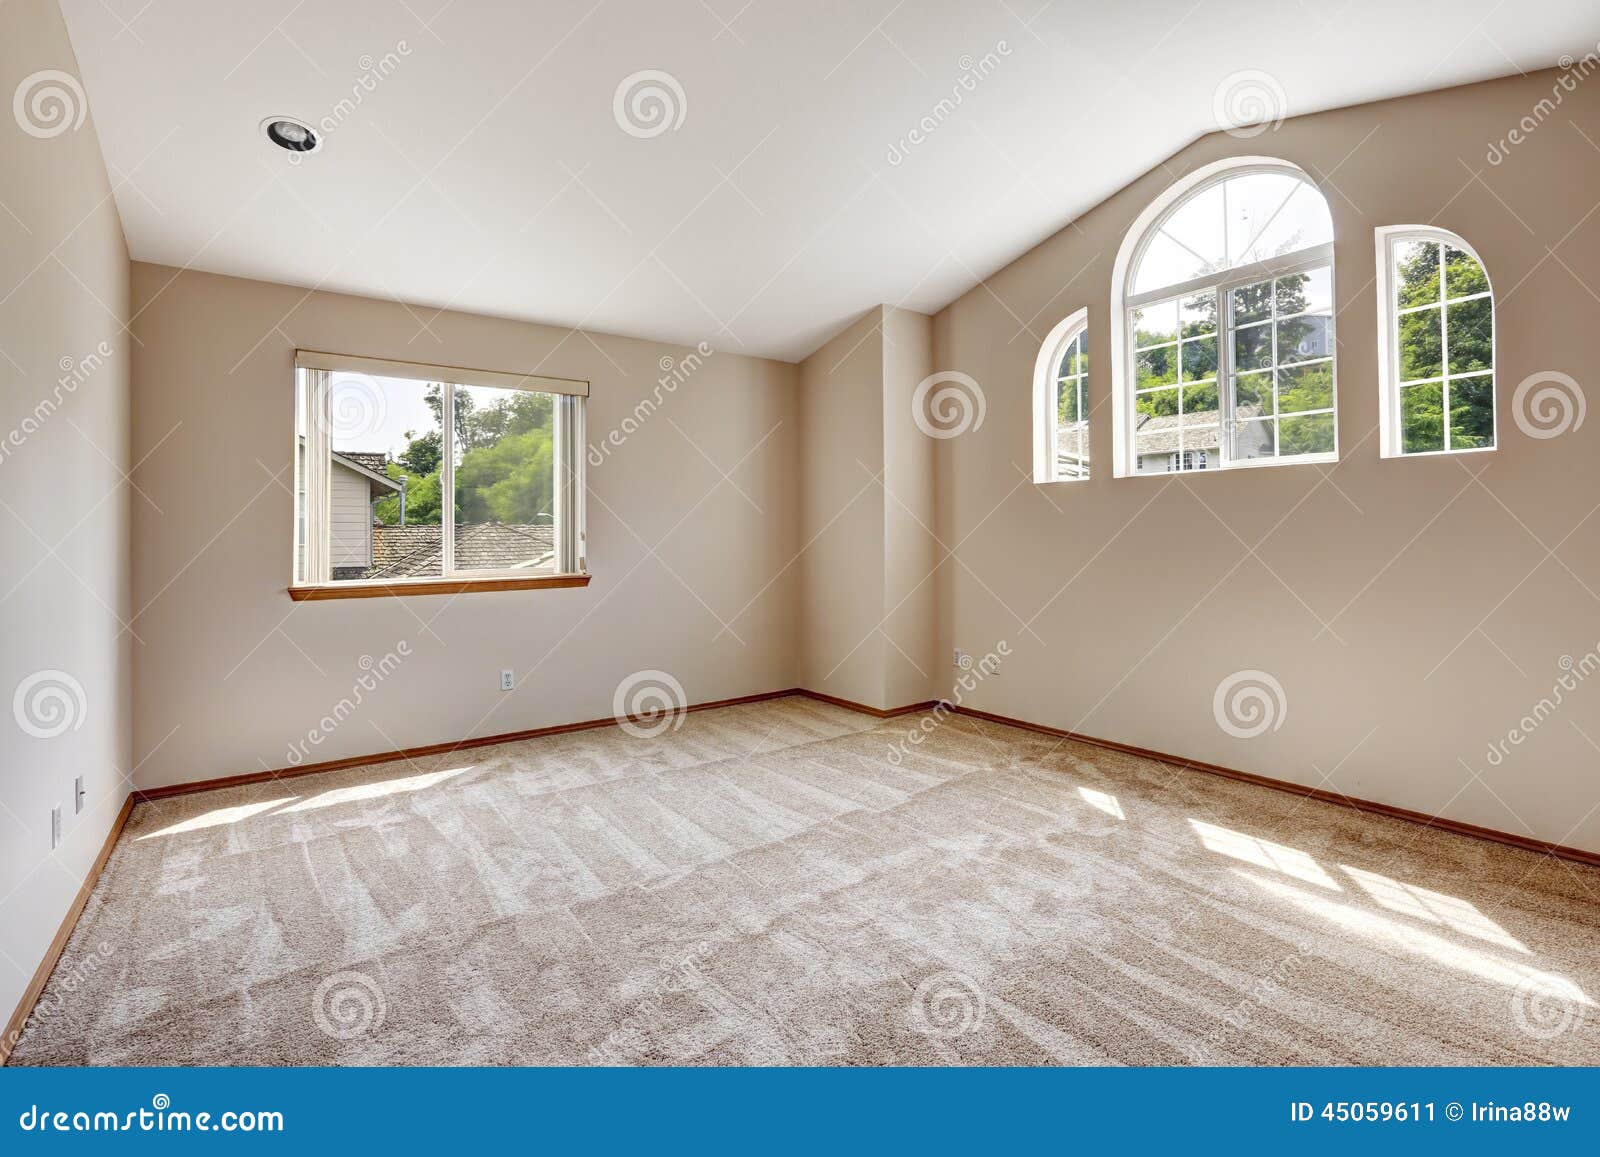 empty master bedroom with window and high vaulted ceiling